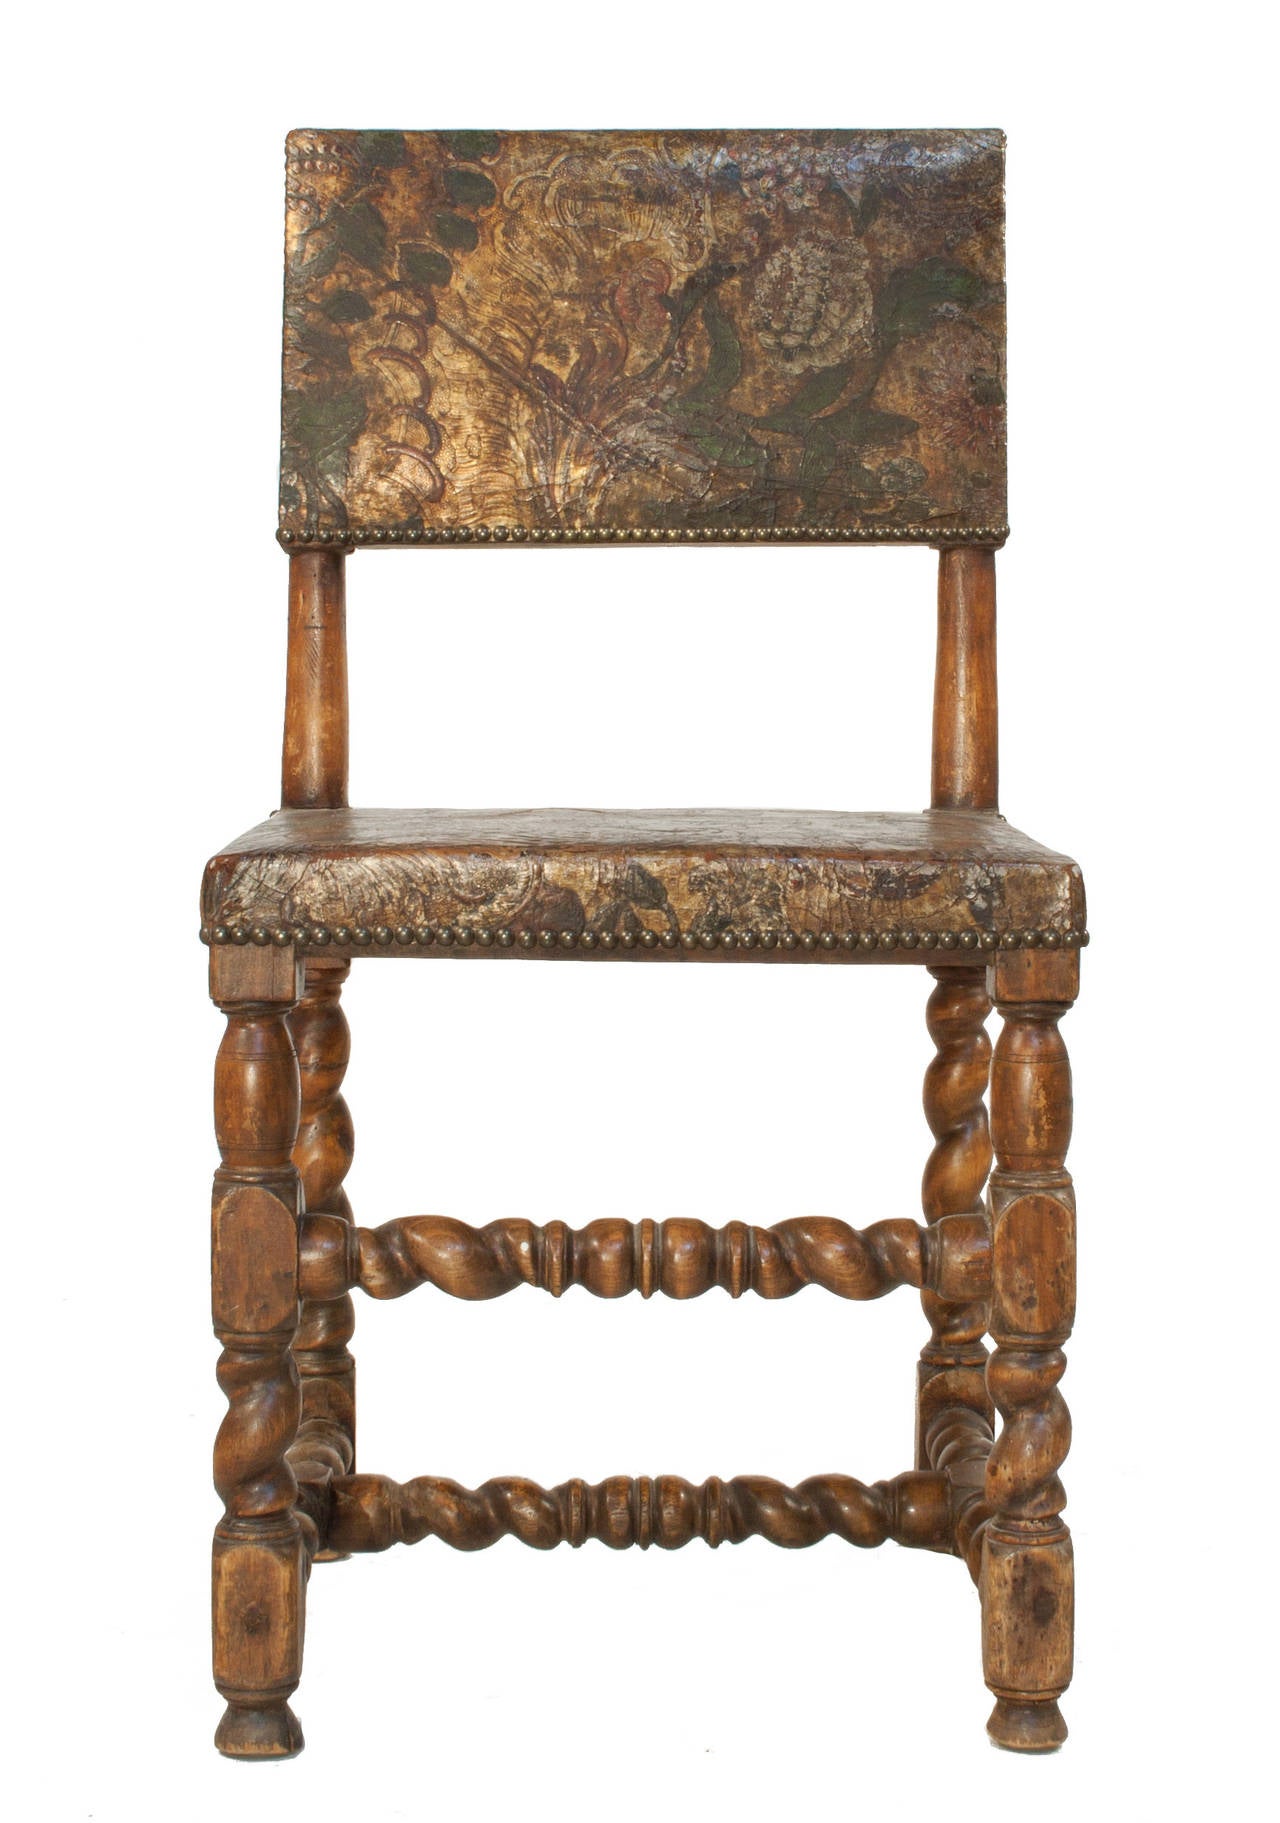 Set of 6 Baroque style Side Chairs with embosed leather.